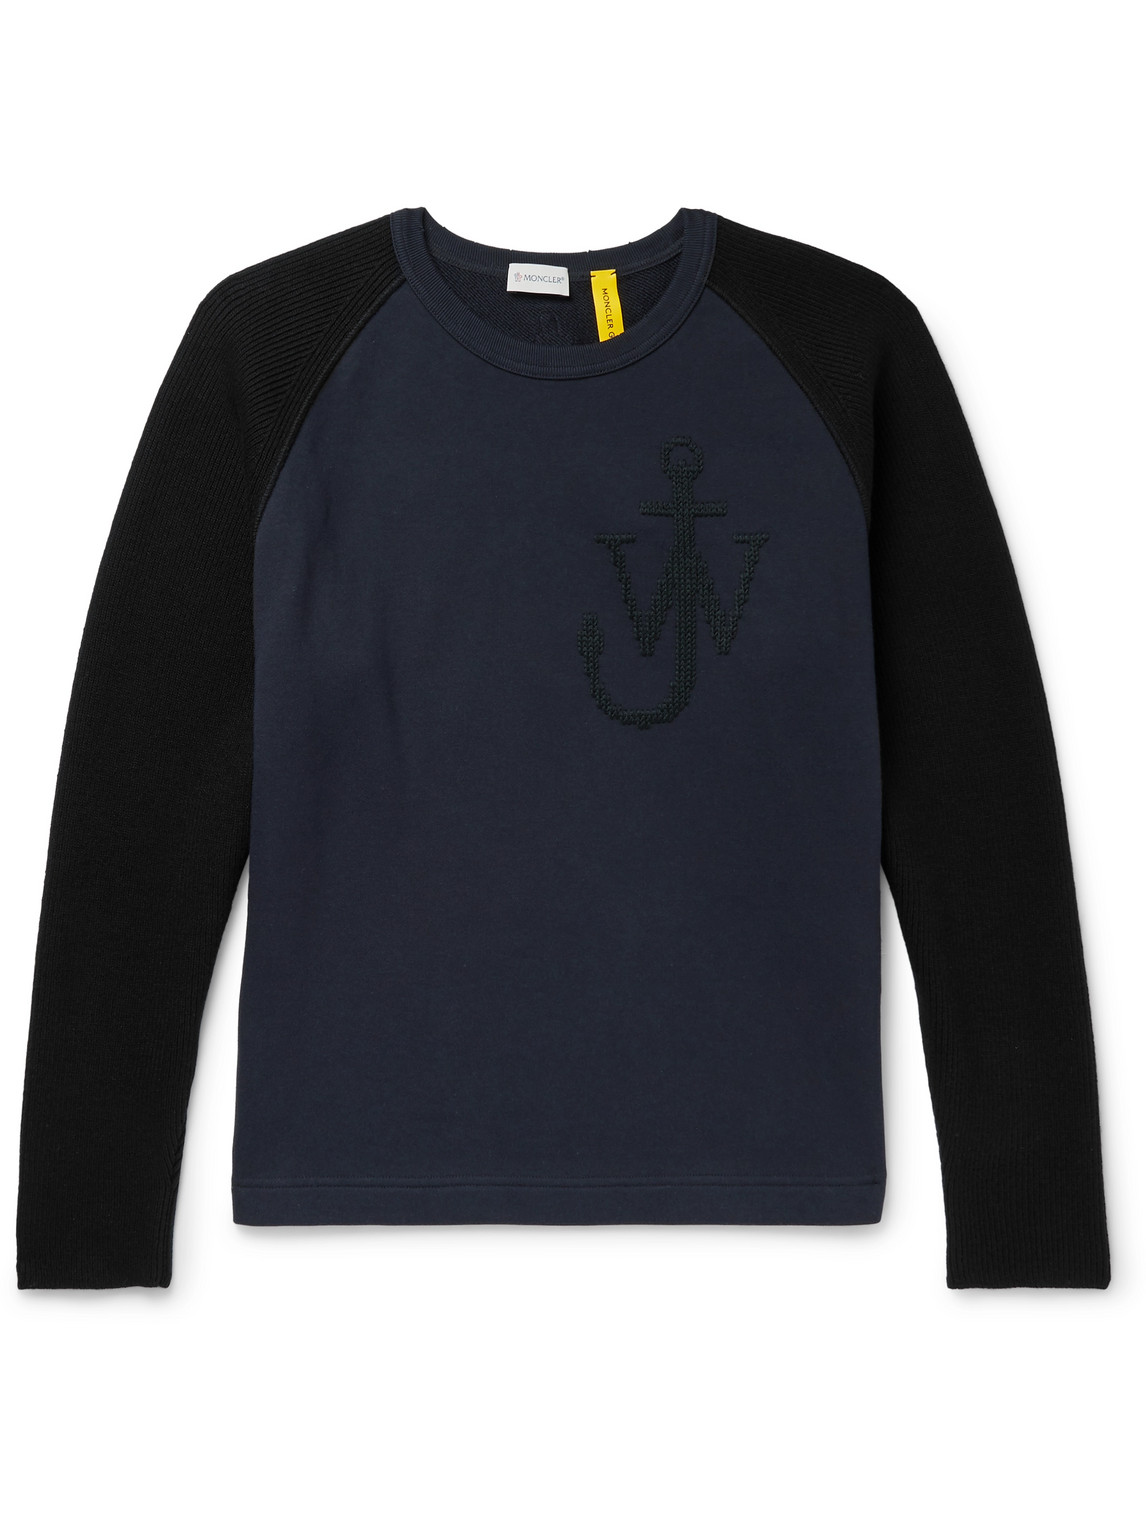 Moncler Genius 1 Moncler JW Anderson Logo-Embroidered Virgin Wool and Loopback Cotton-Jersey Sweatshirt